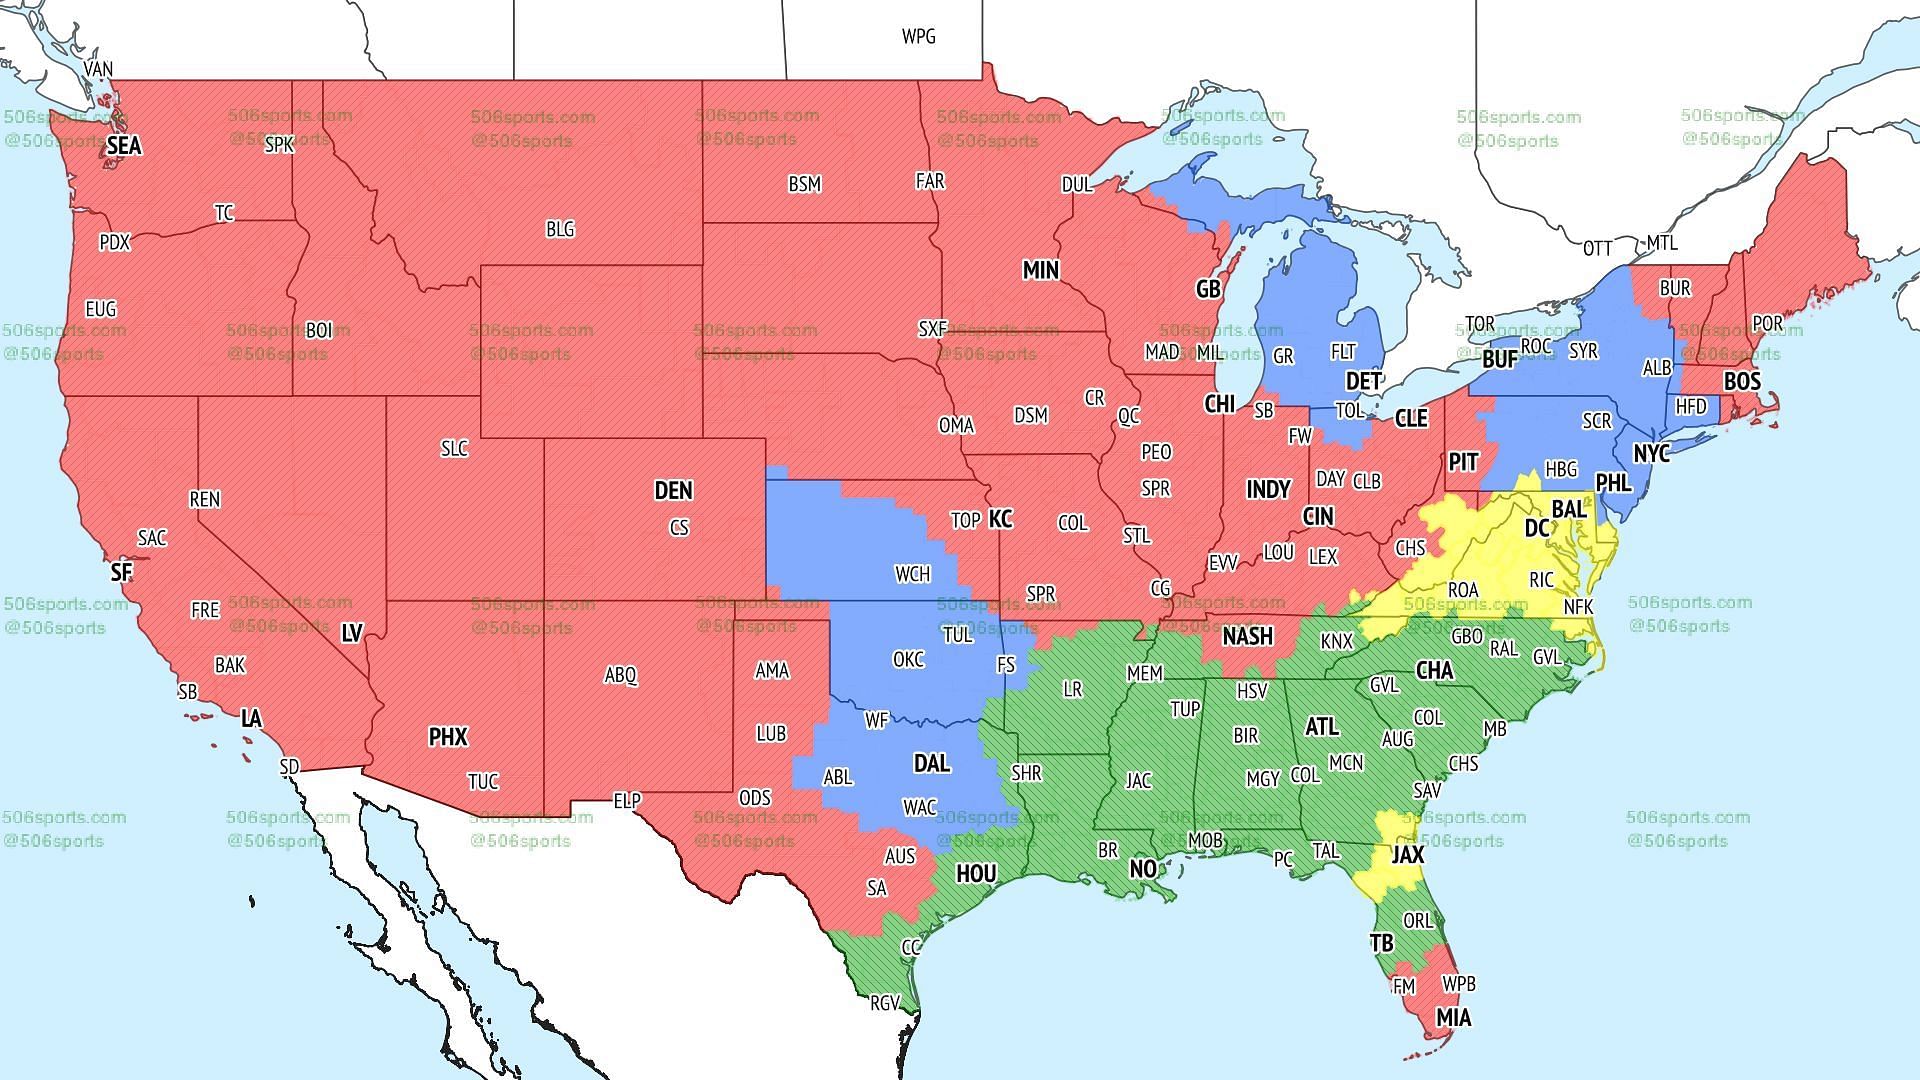 Coverage map for FOX early window games. Photo via 506sports.com